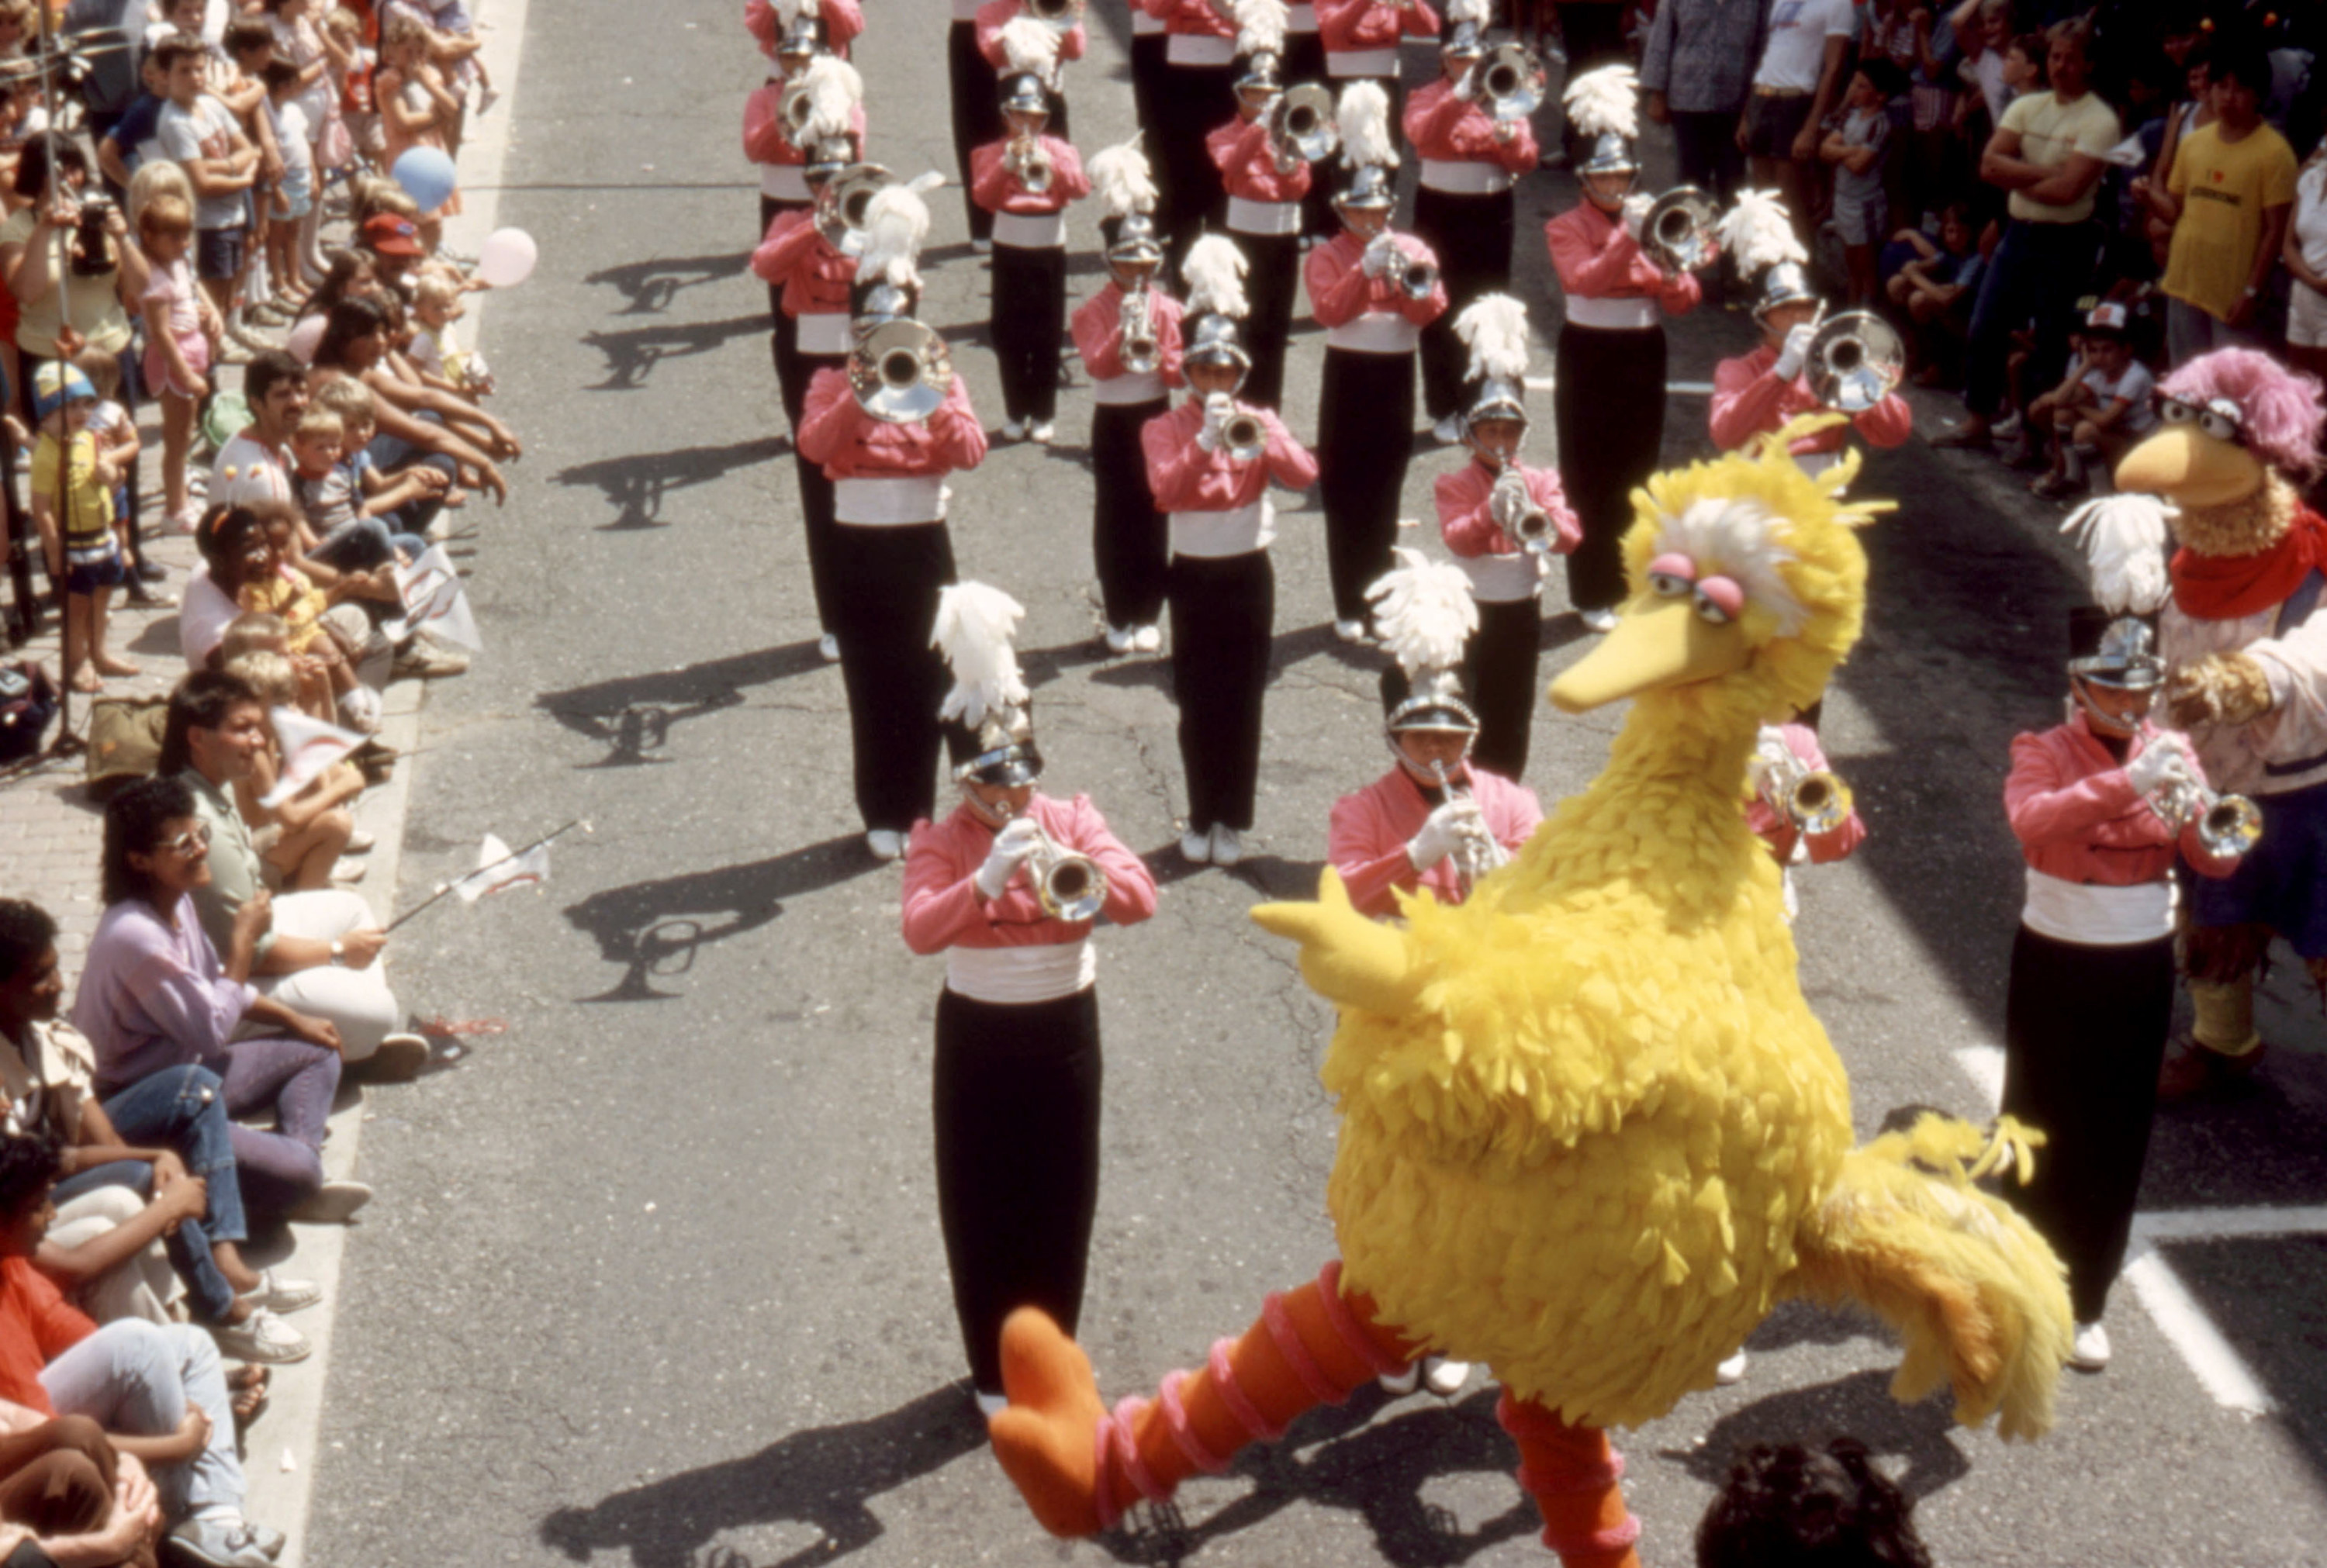 Big Bird leads a marching band